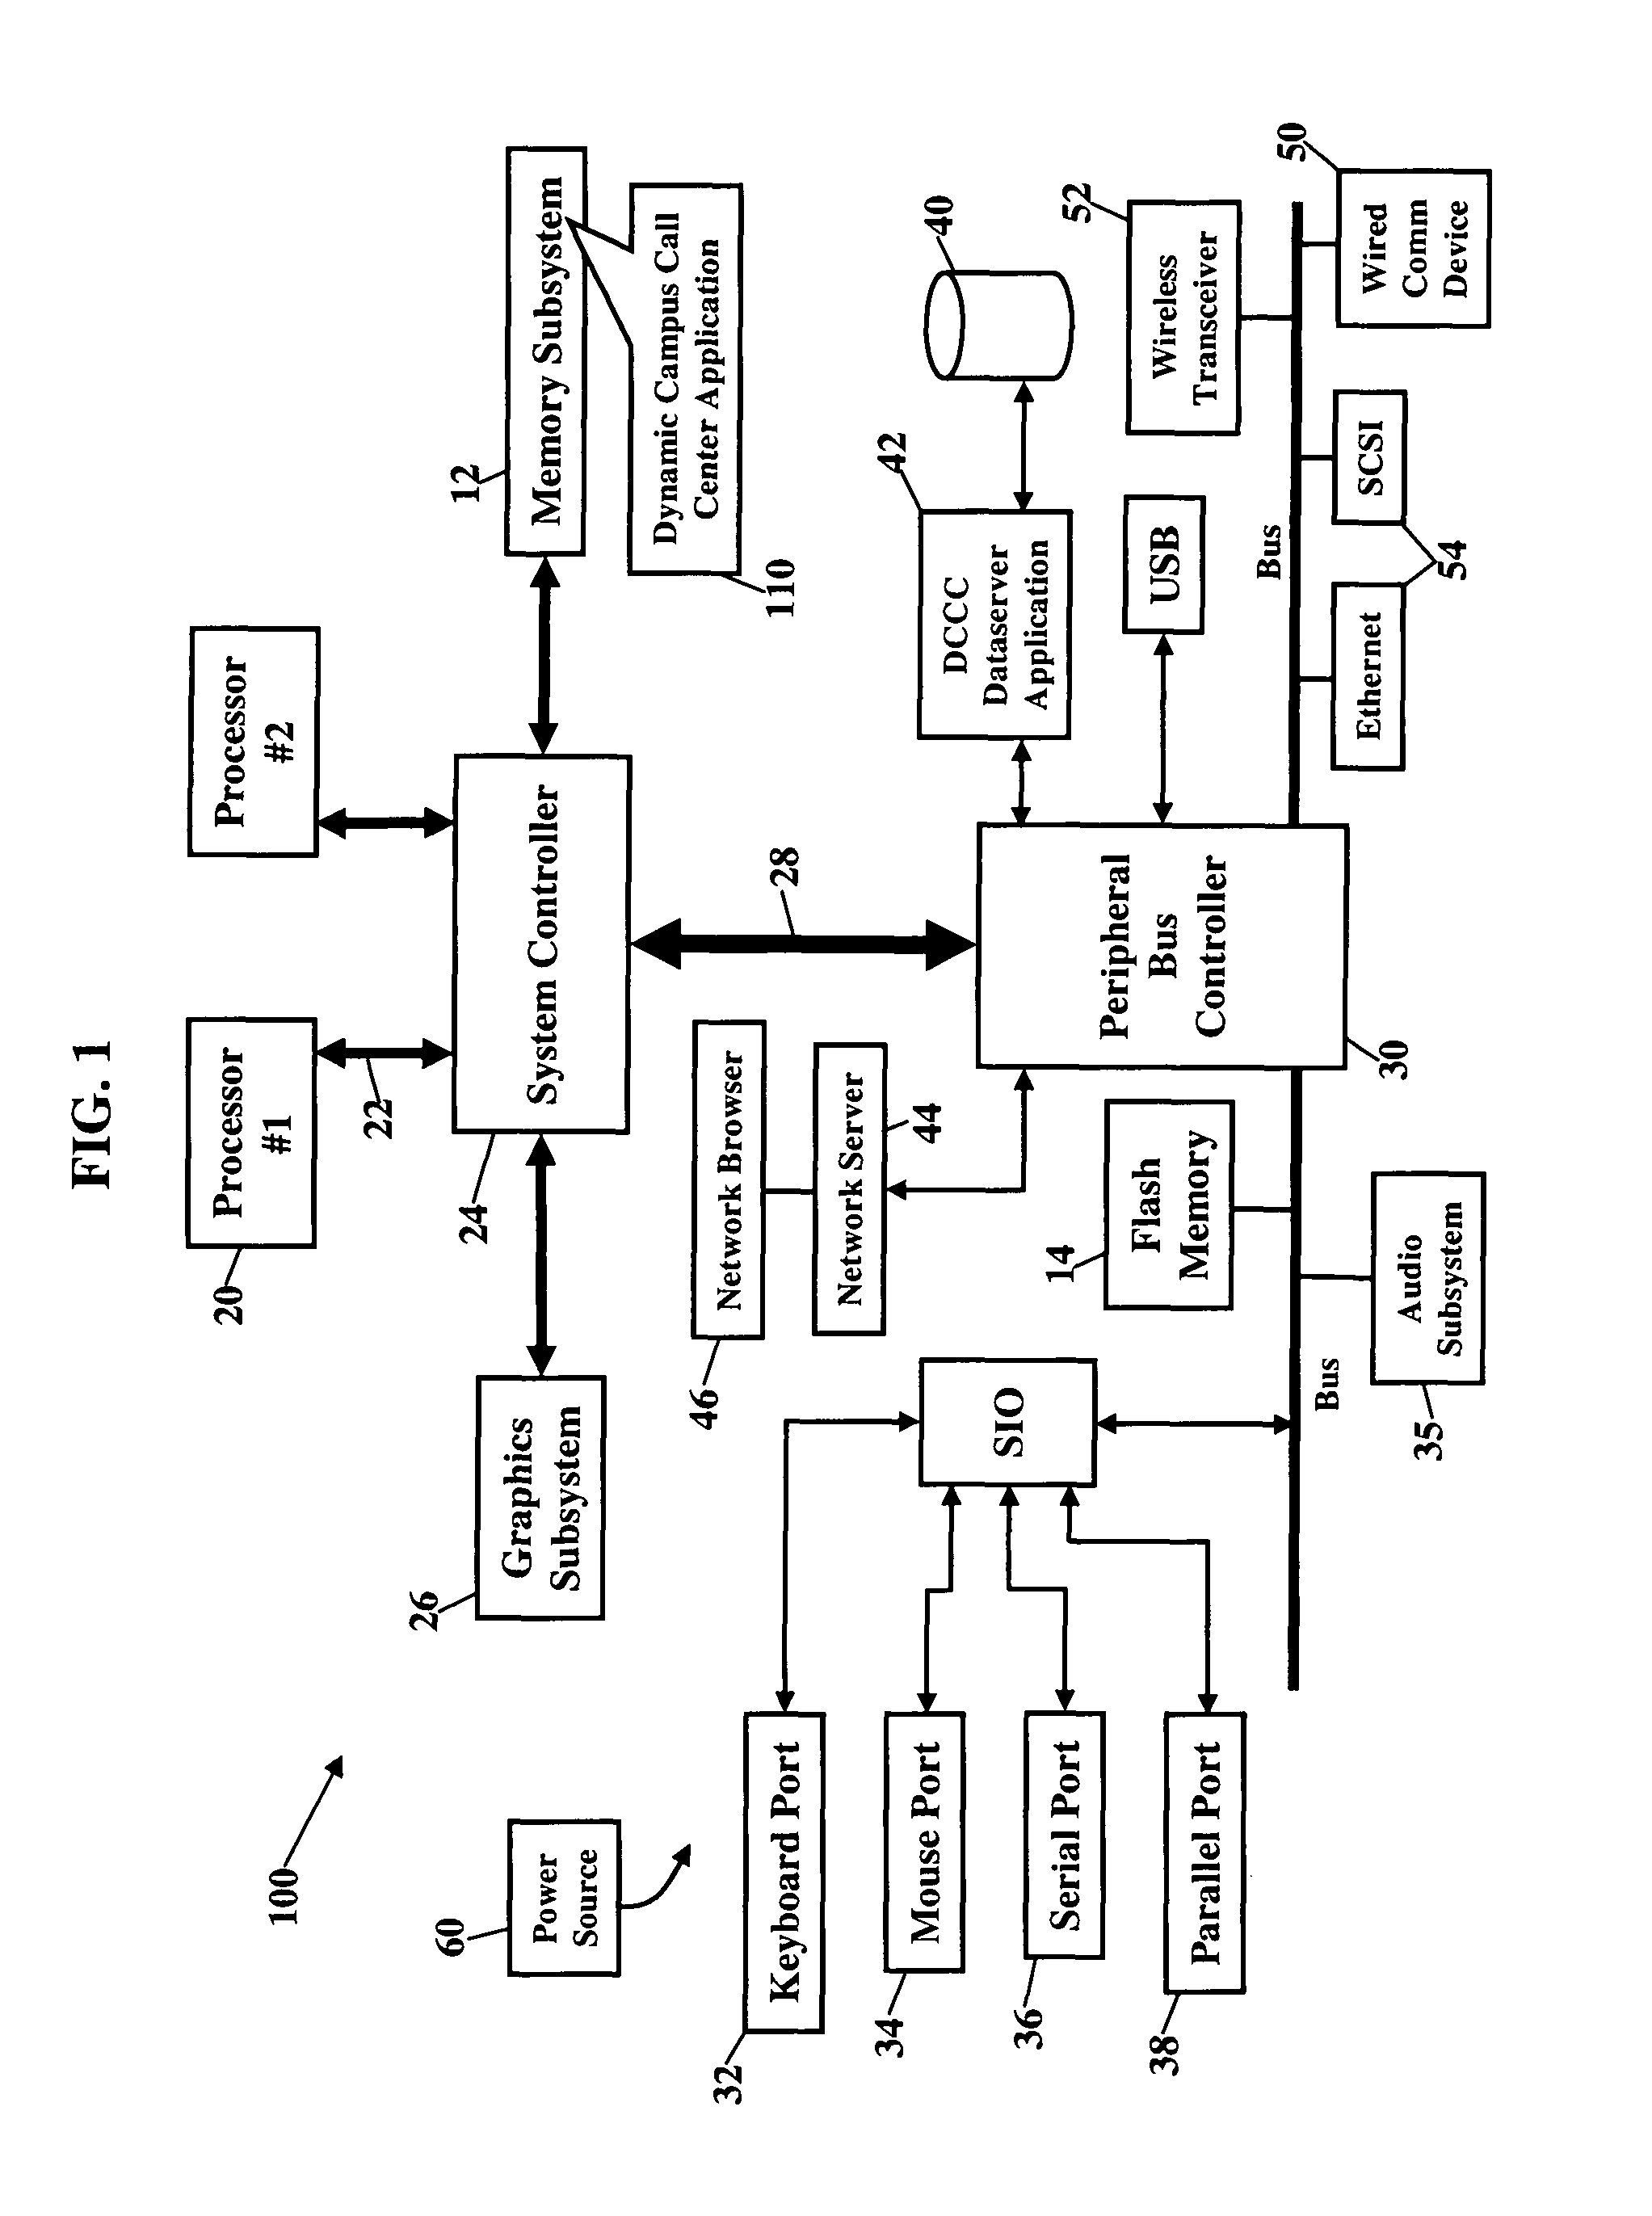 Computer telephony integration (CTI) systems and methods for enhancing school safety